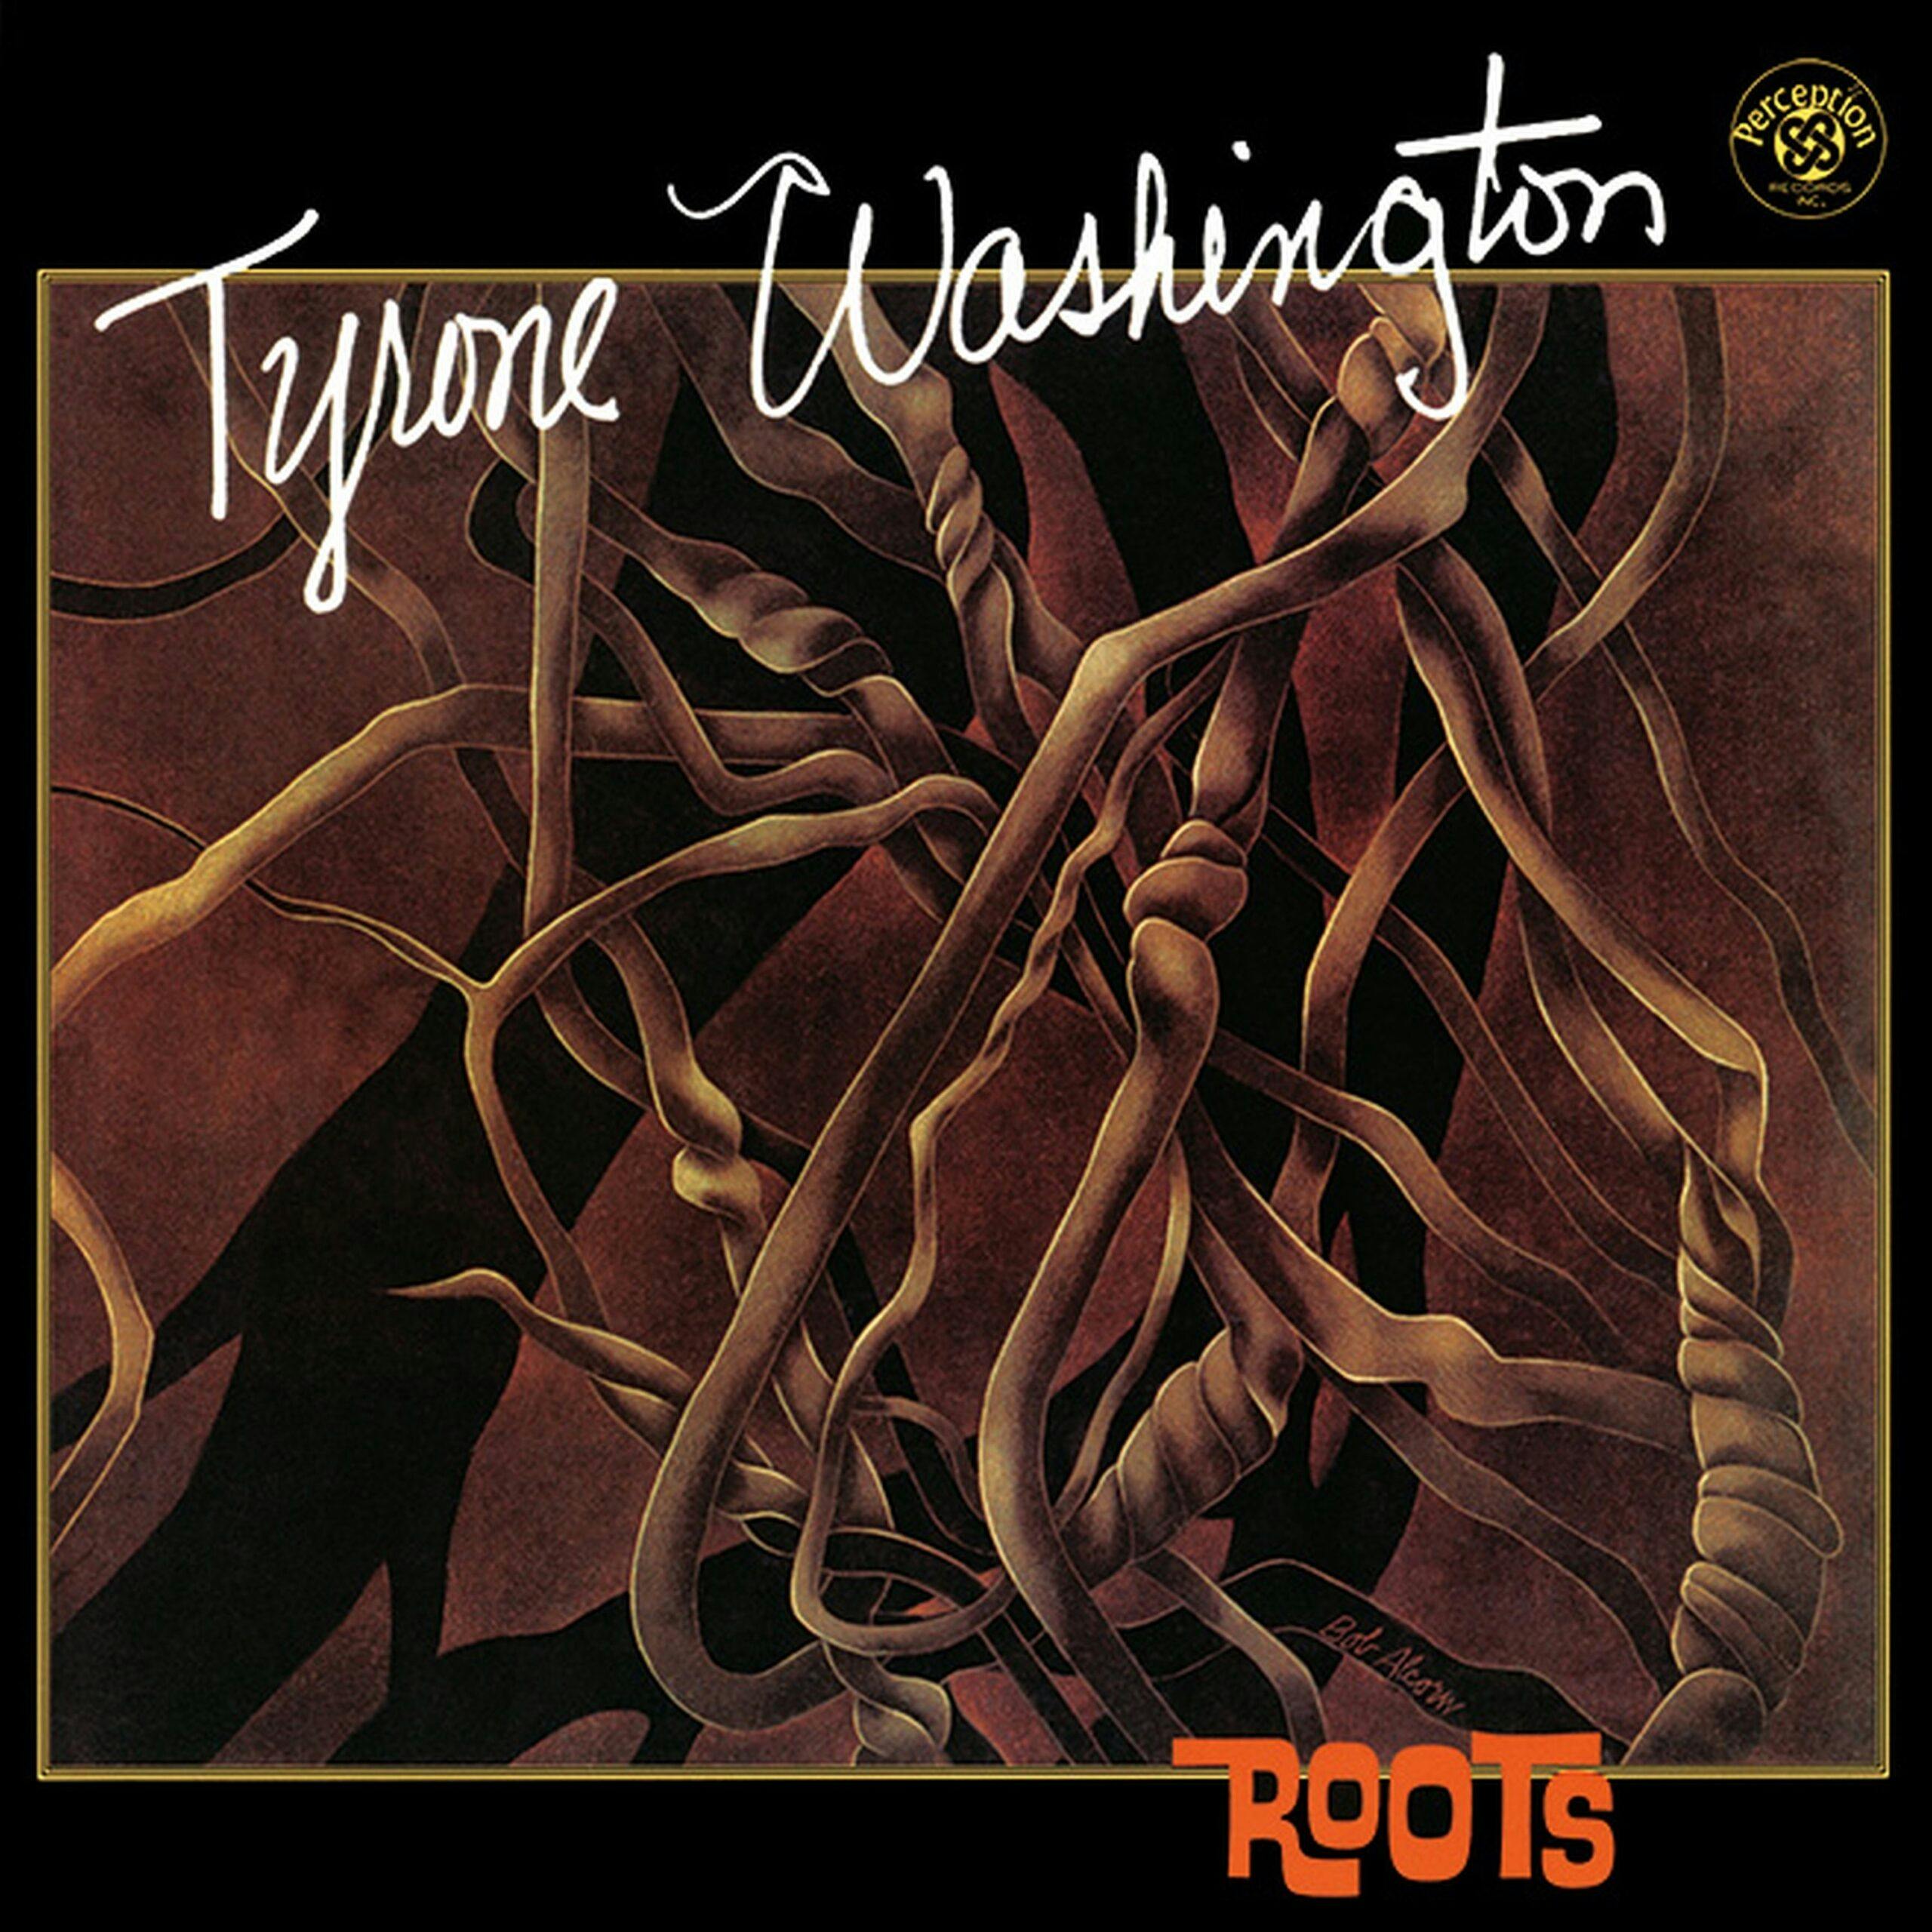 Representing his 2nd album as band leader and his penultimate solo album in total, Tyrone Washington's 1973 Roots album for Perception serves to remind us of the Jazz musician who became a mystery as he disappeared from recorded music.